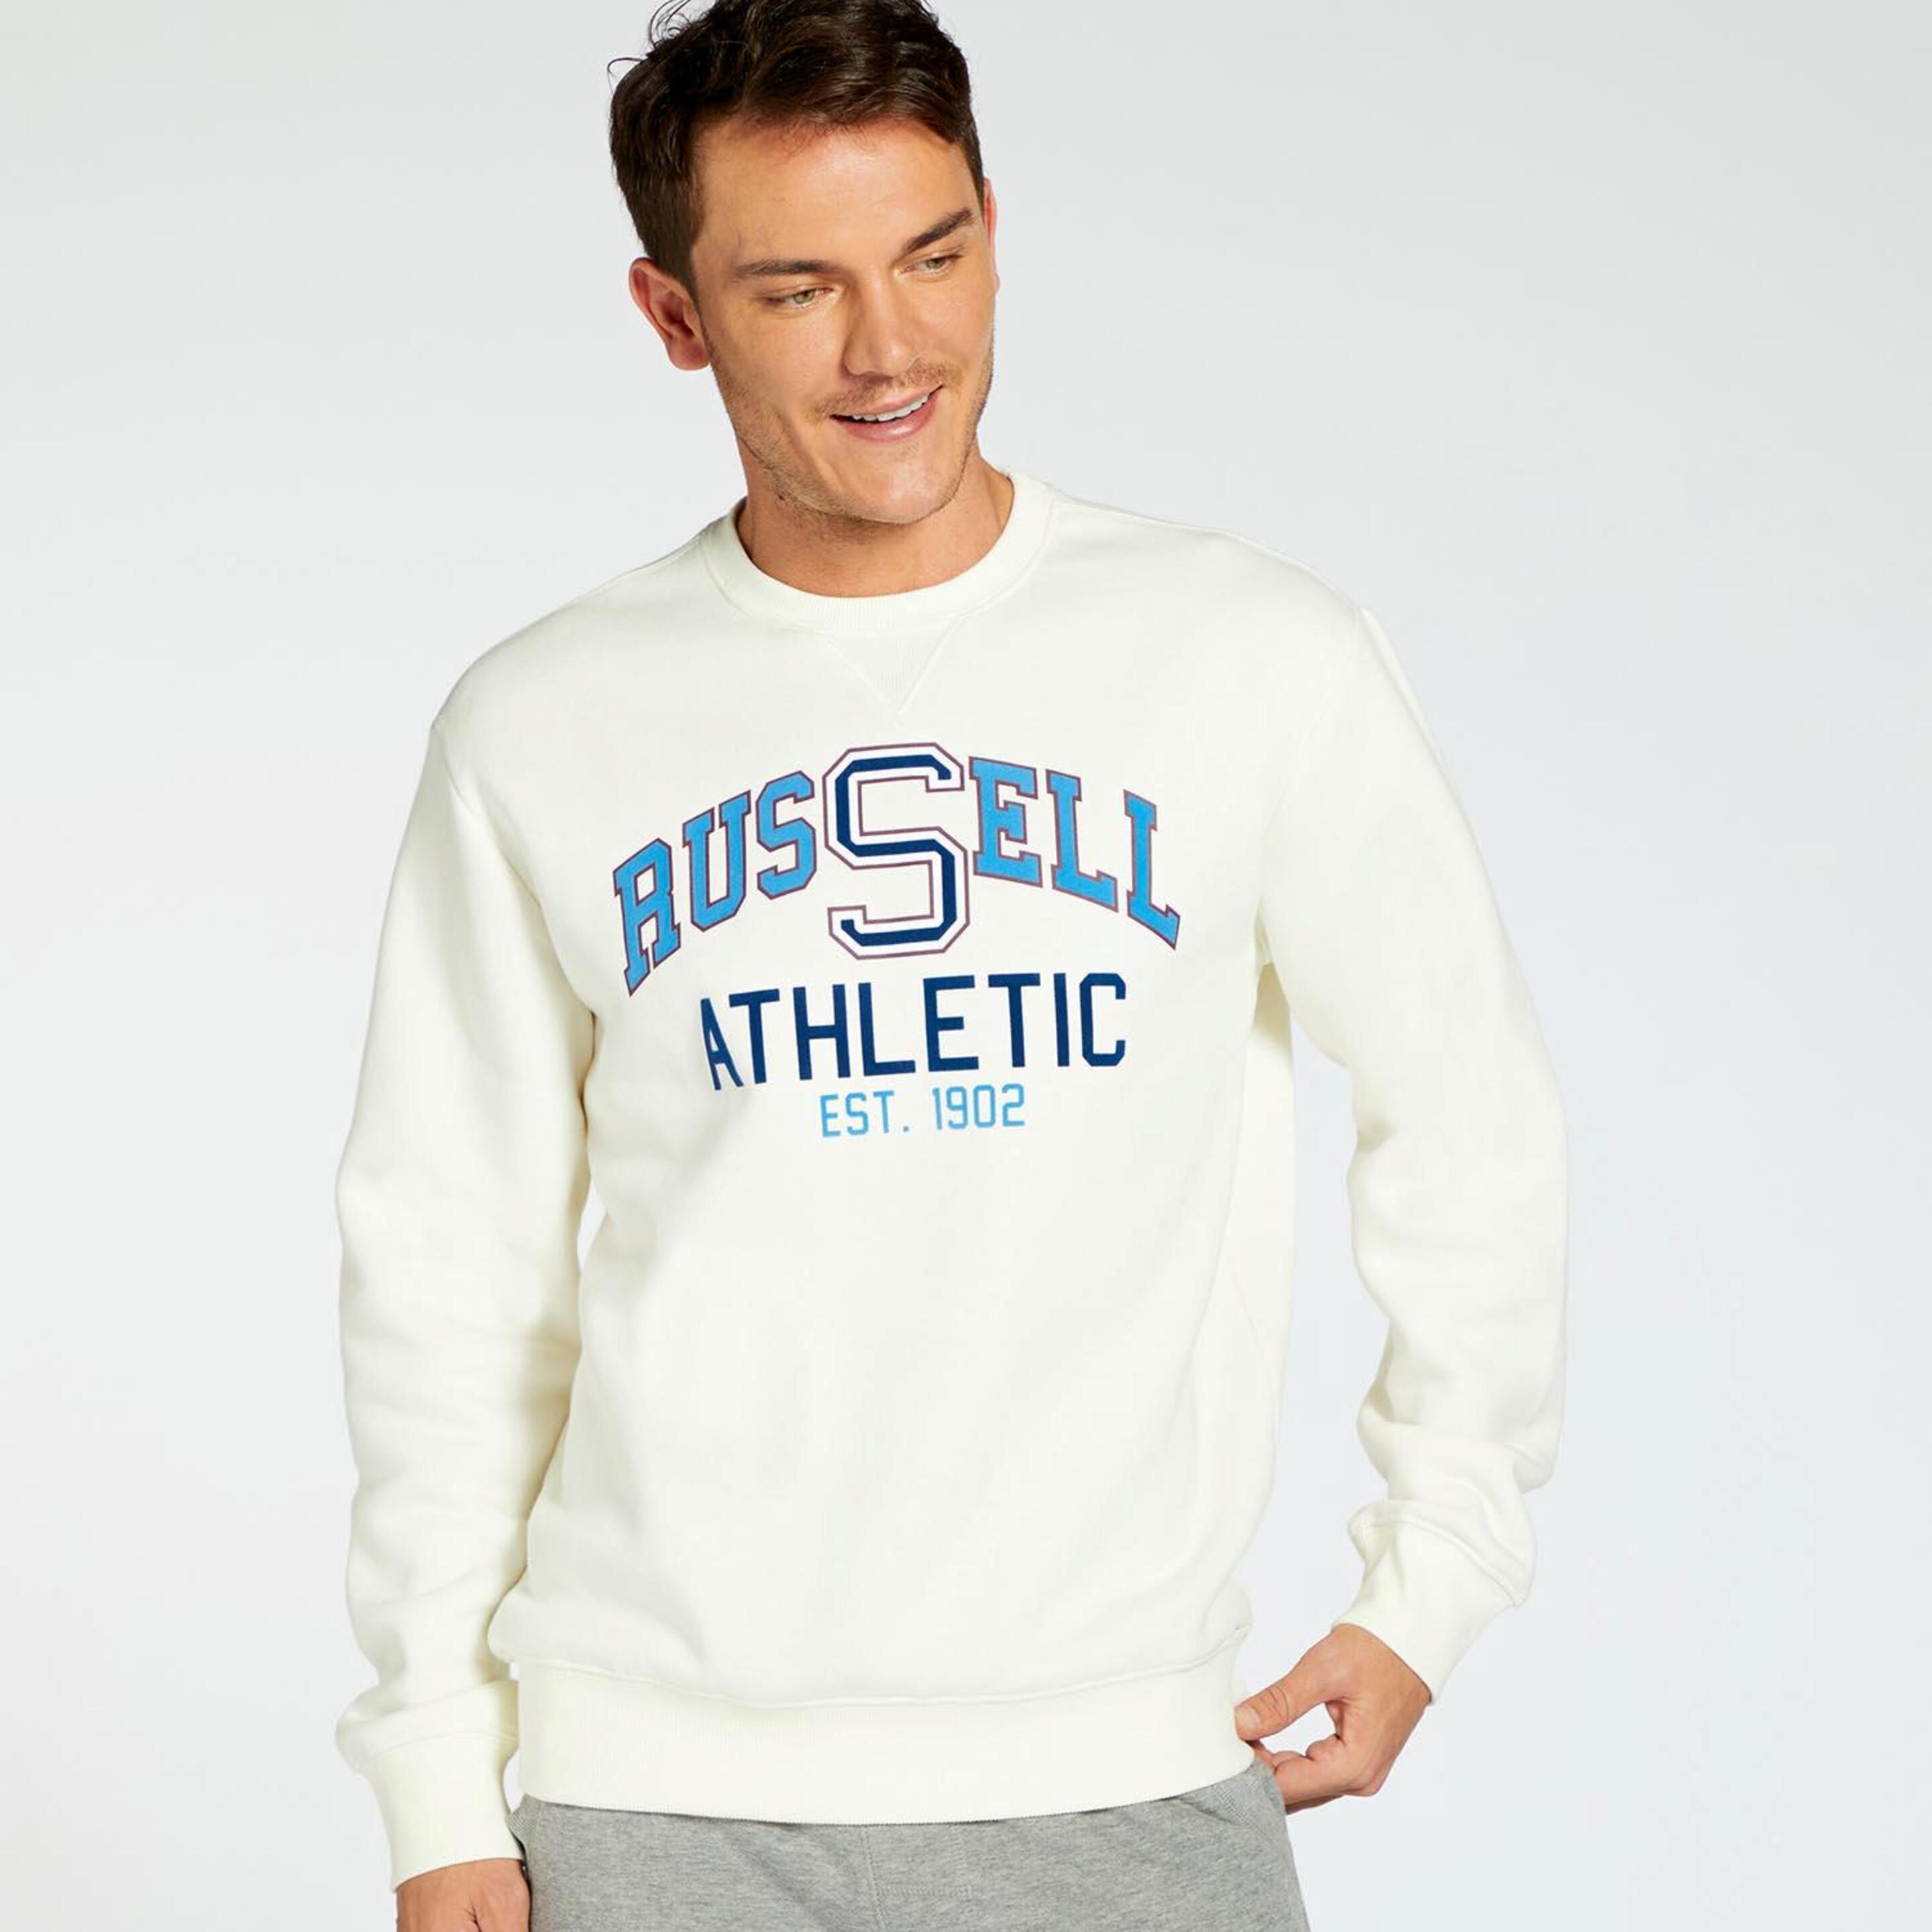 Russell Athletic Colleguiate